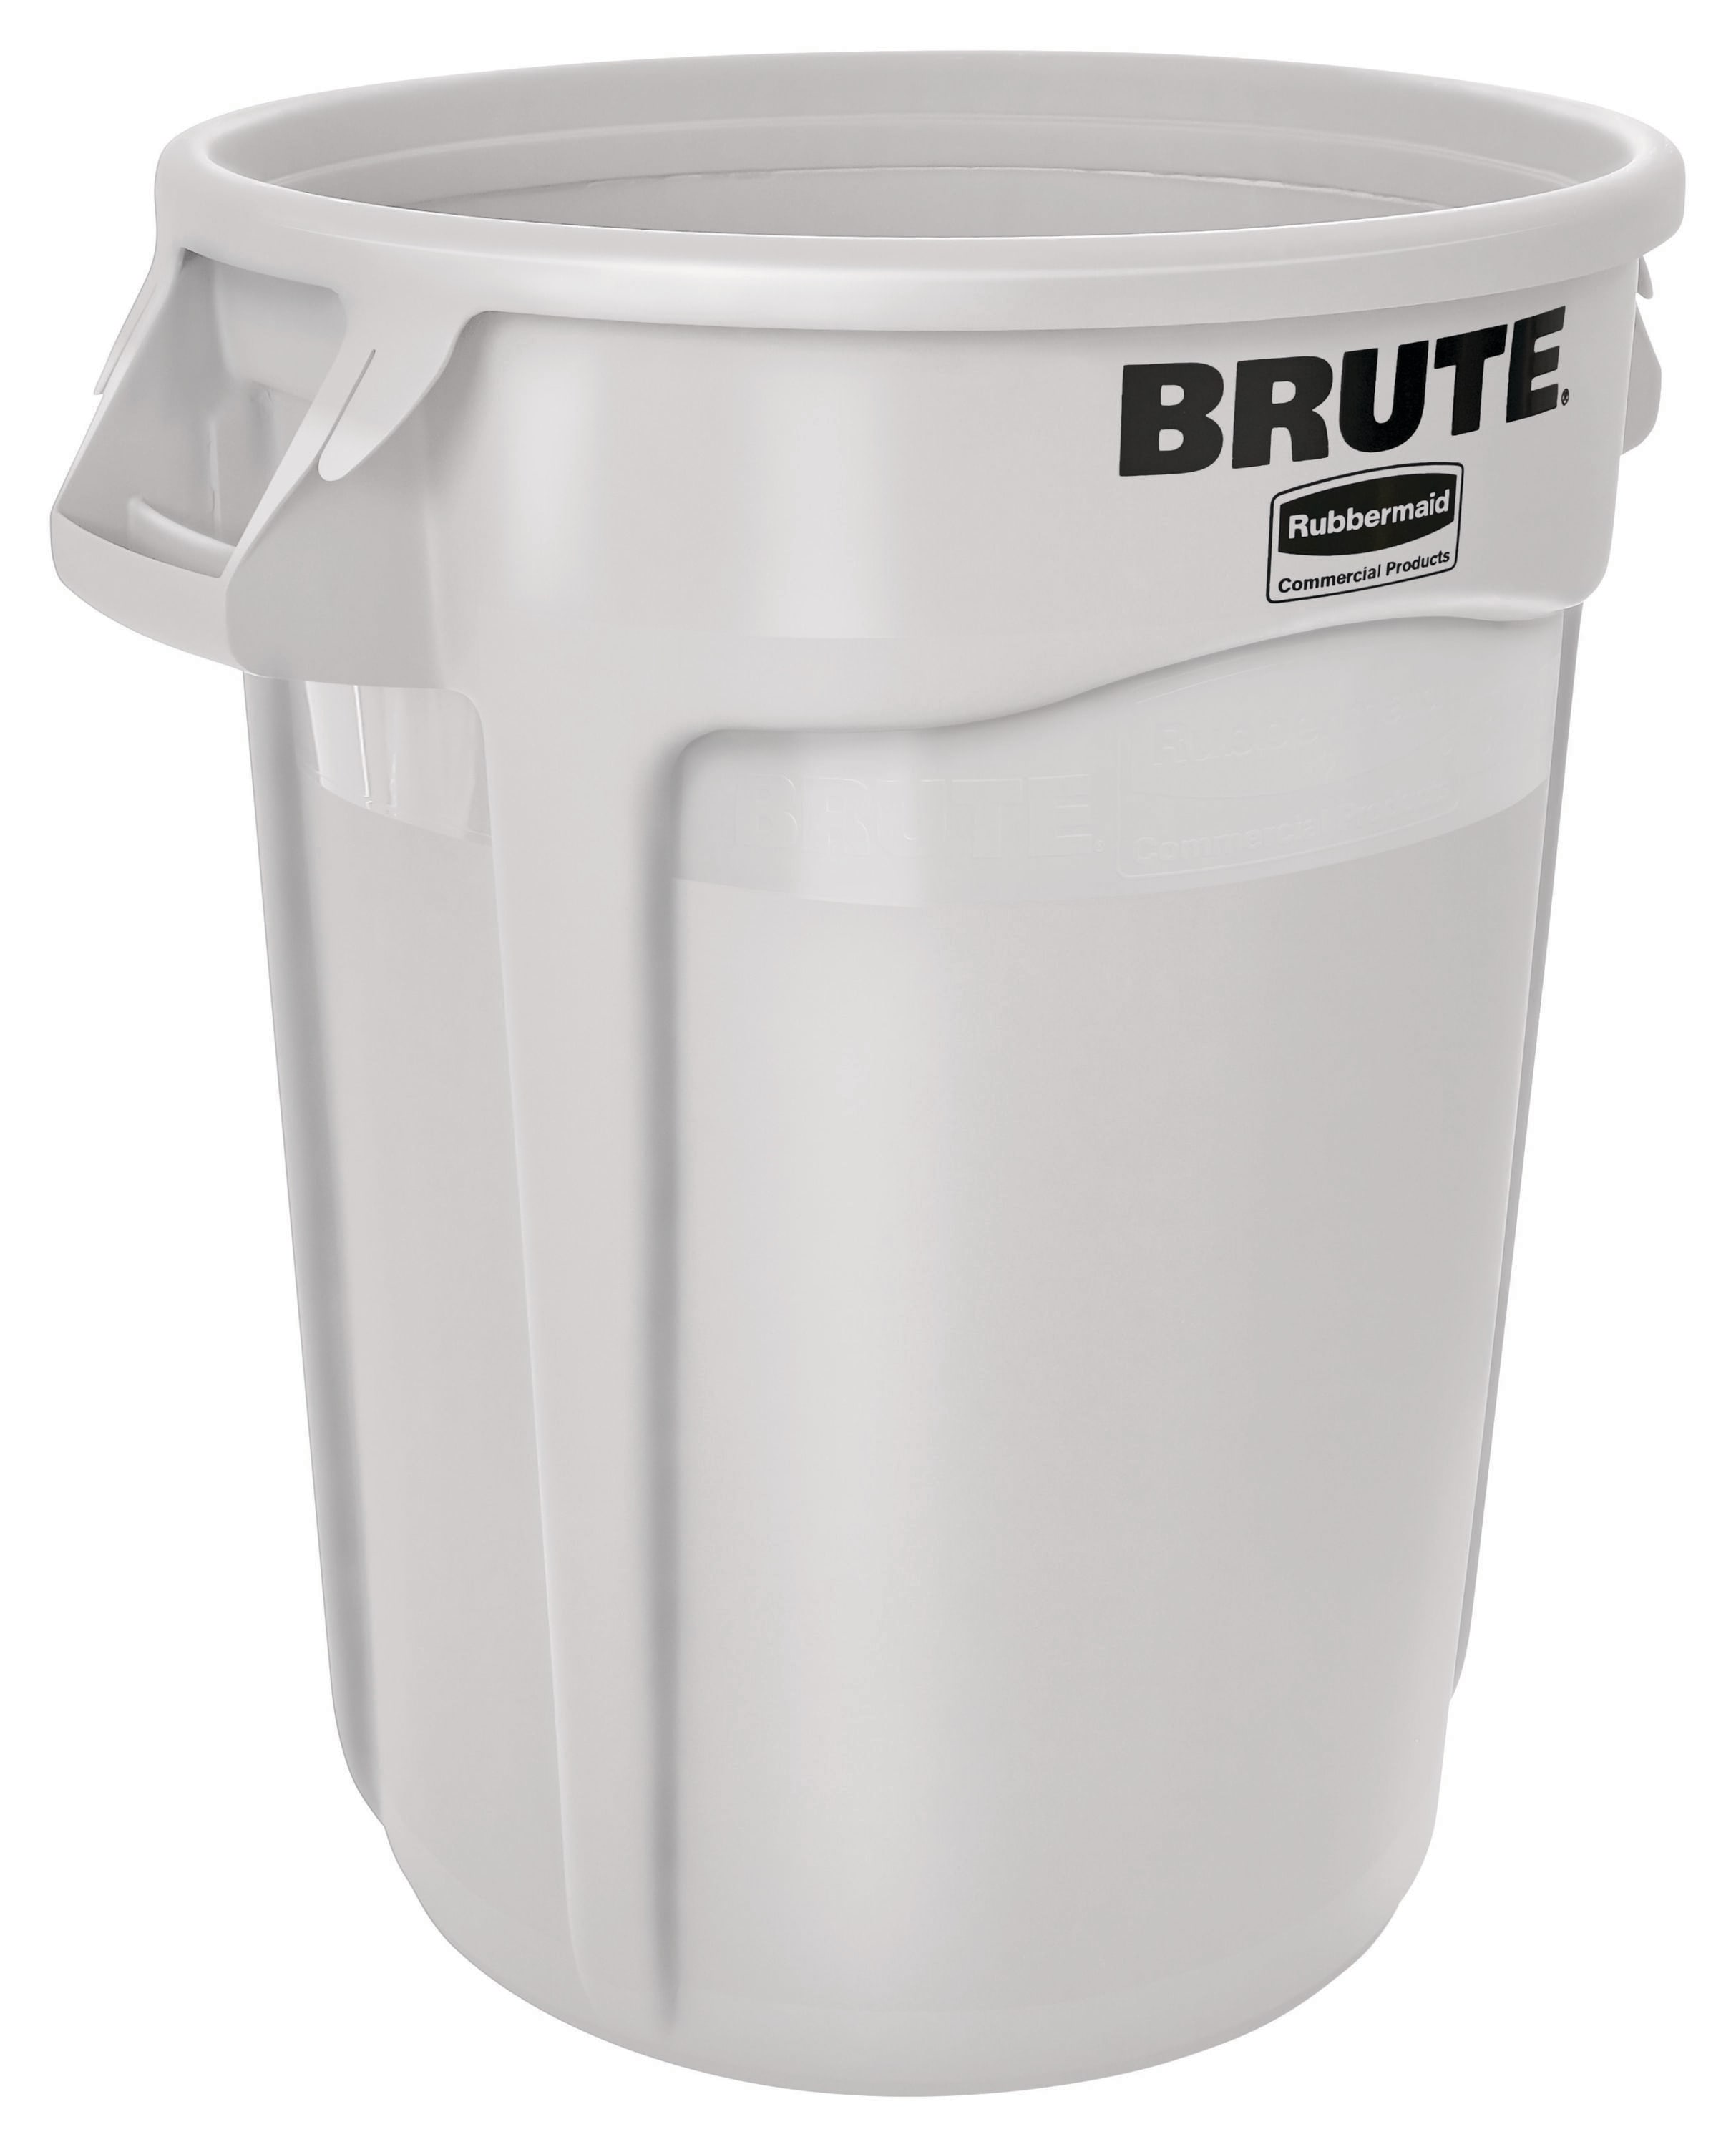 32 gal Brute Round Plastic Garage Large Trash Can Gray Commercial Use  Outdoor